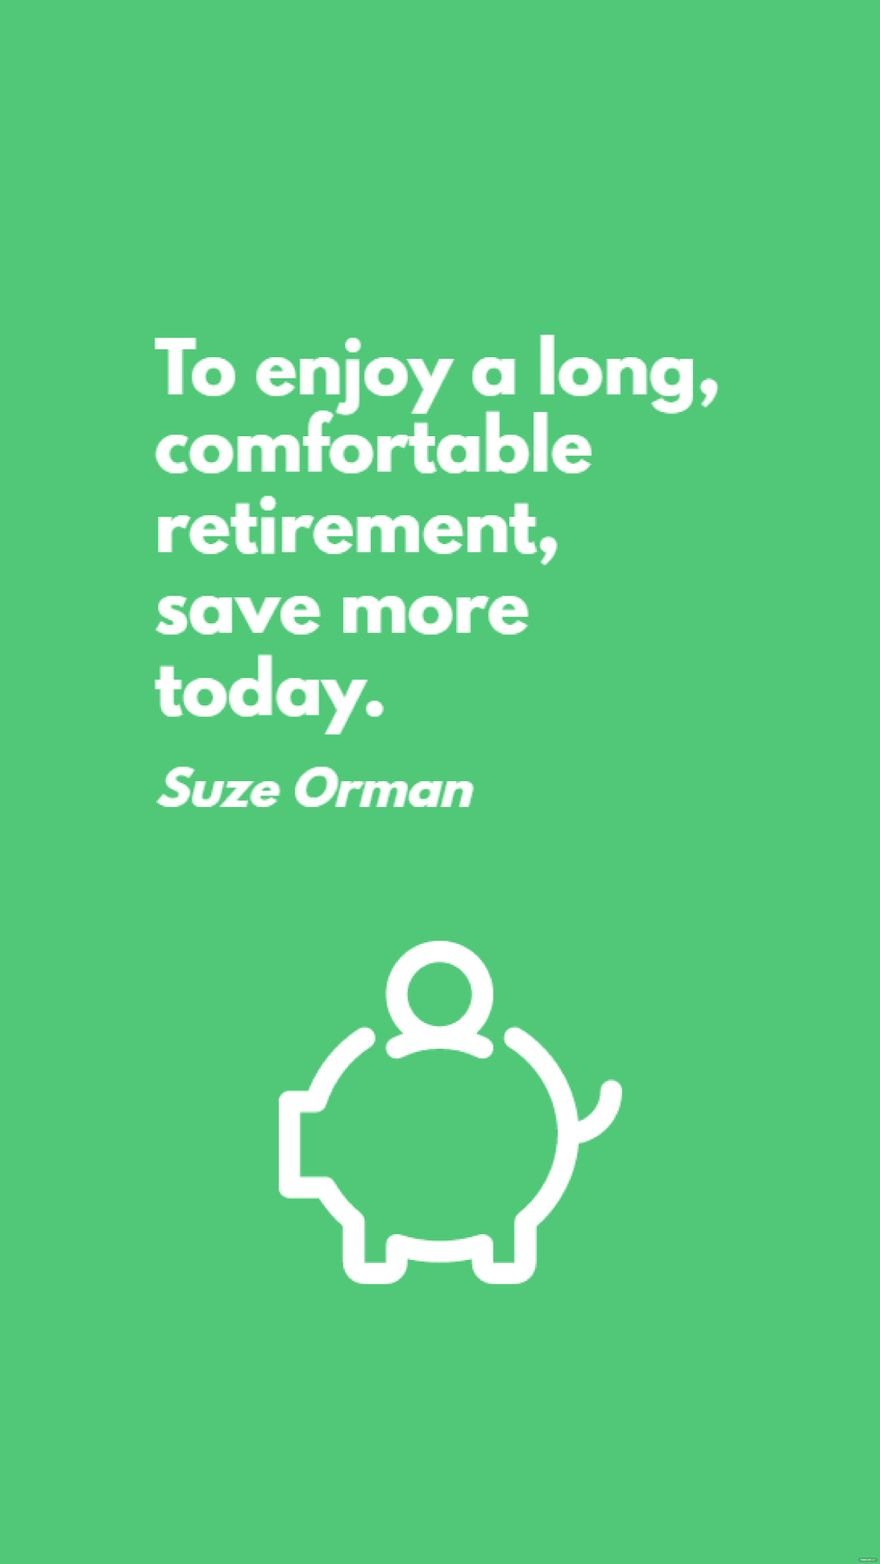 Suze Orman - To enjoy a long, comfortable retirement, save more today.